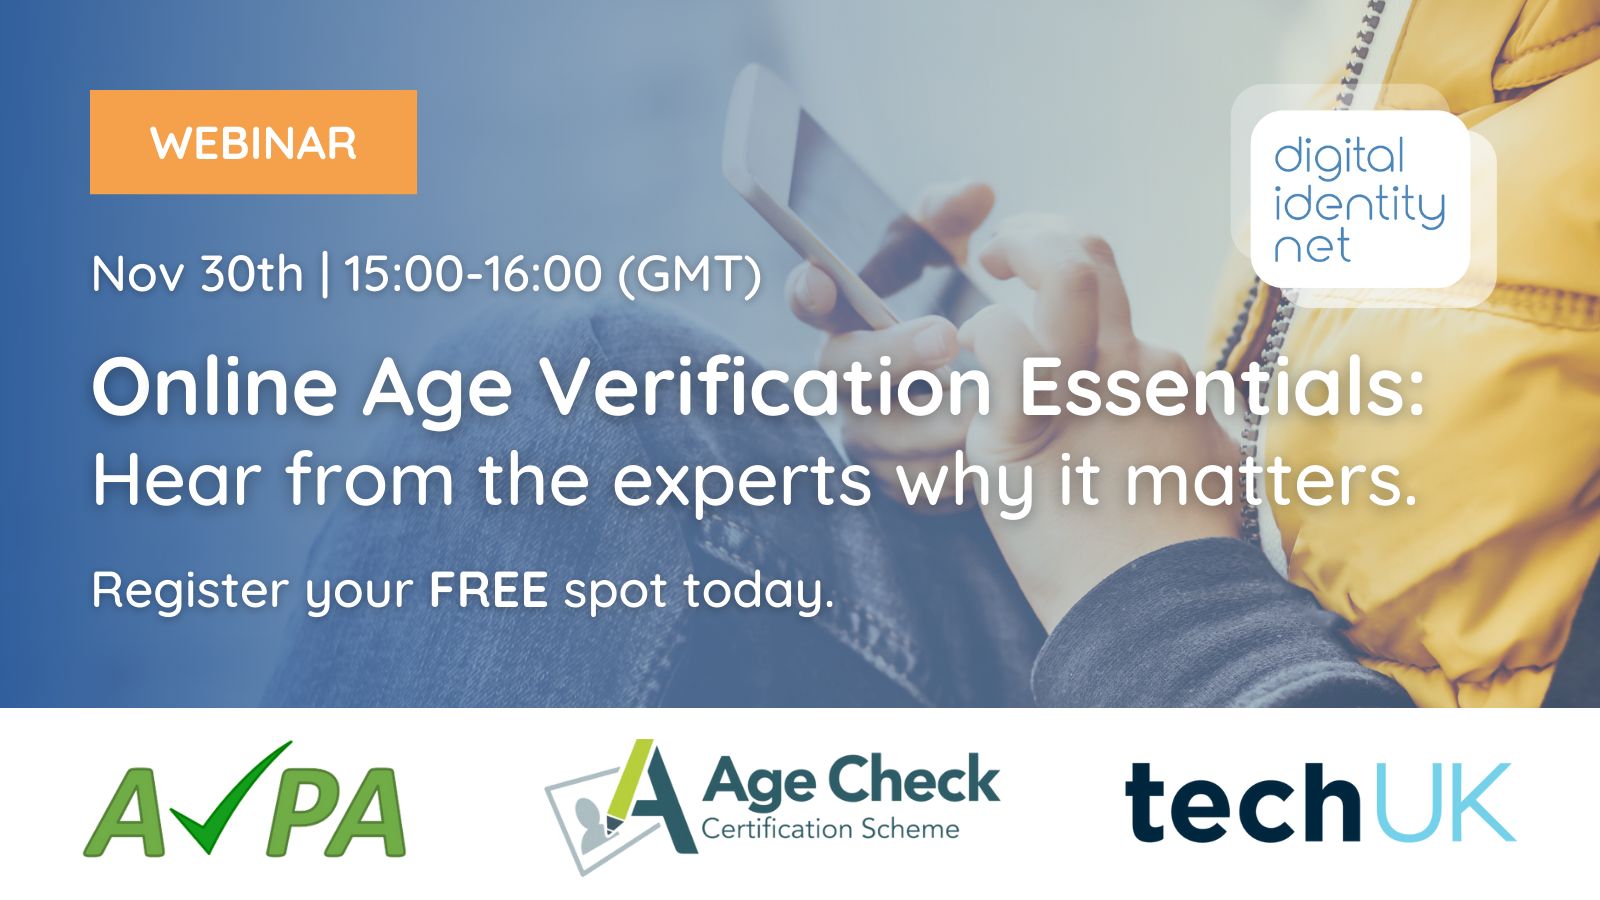 Online Age Verification Essentials: Hear from the experts